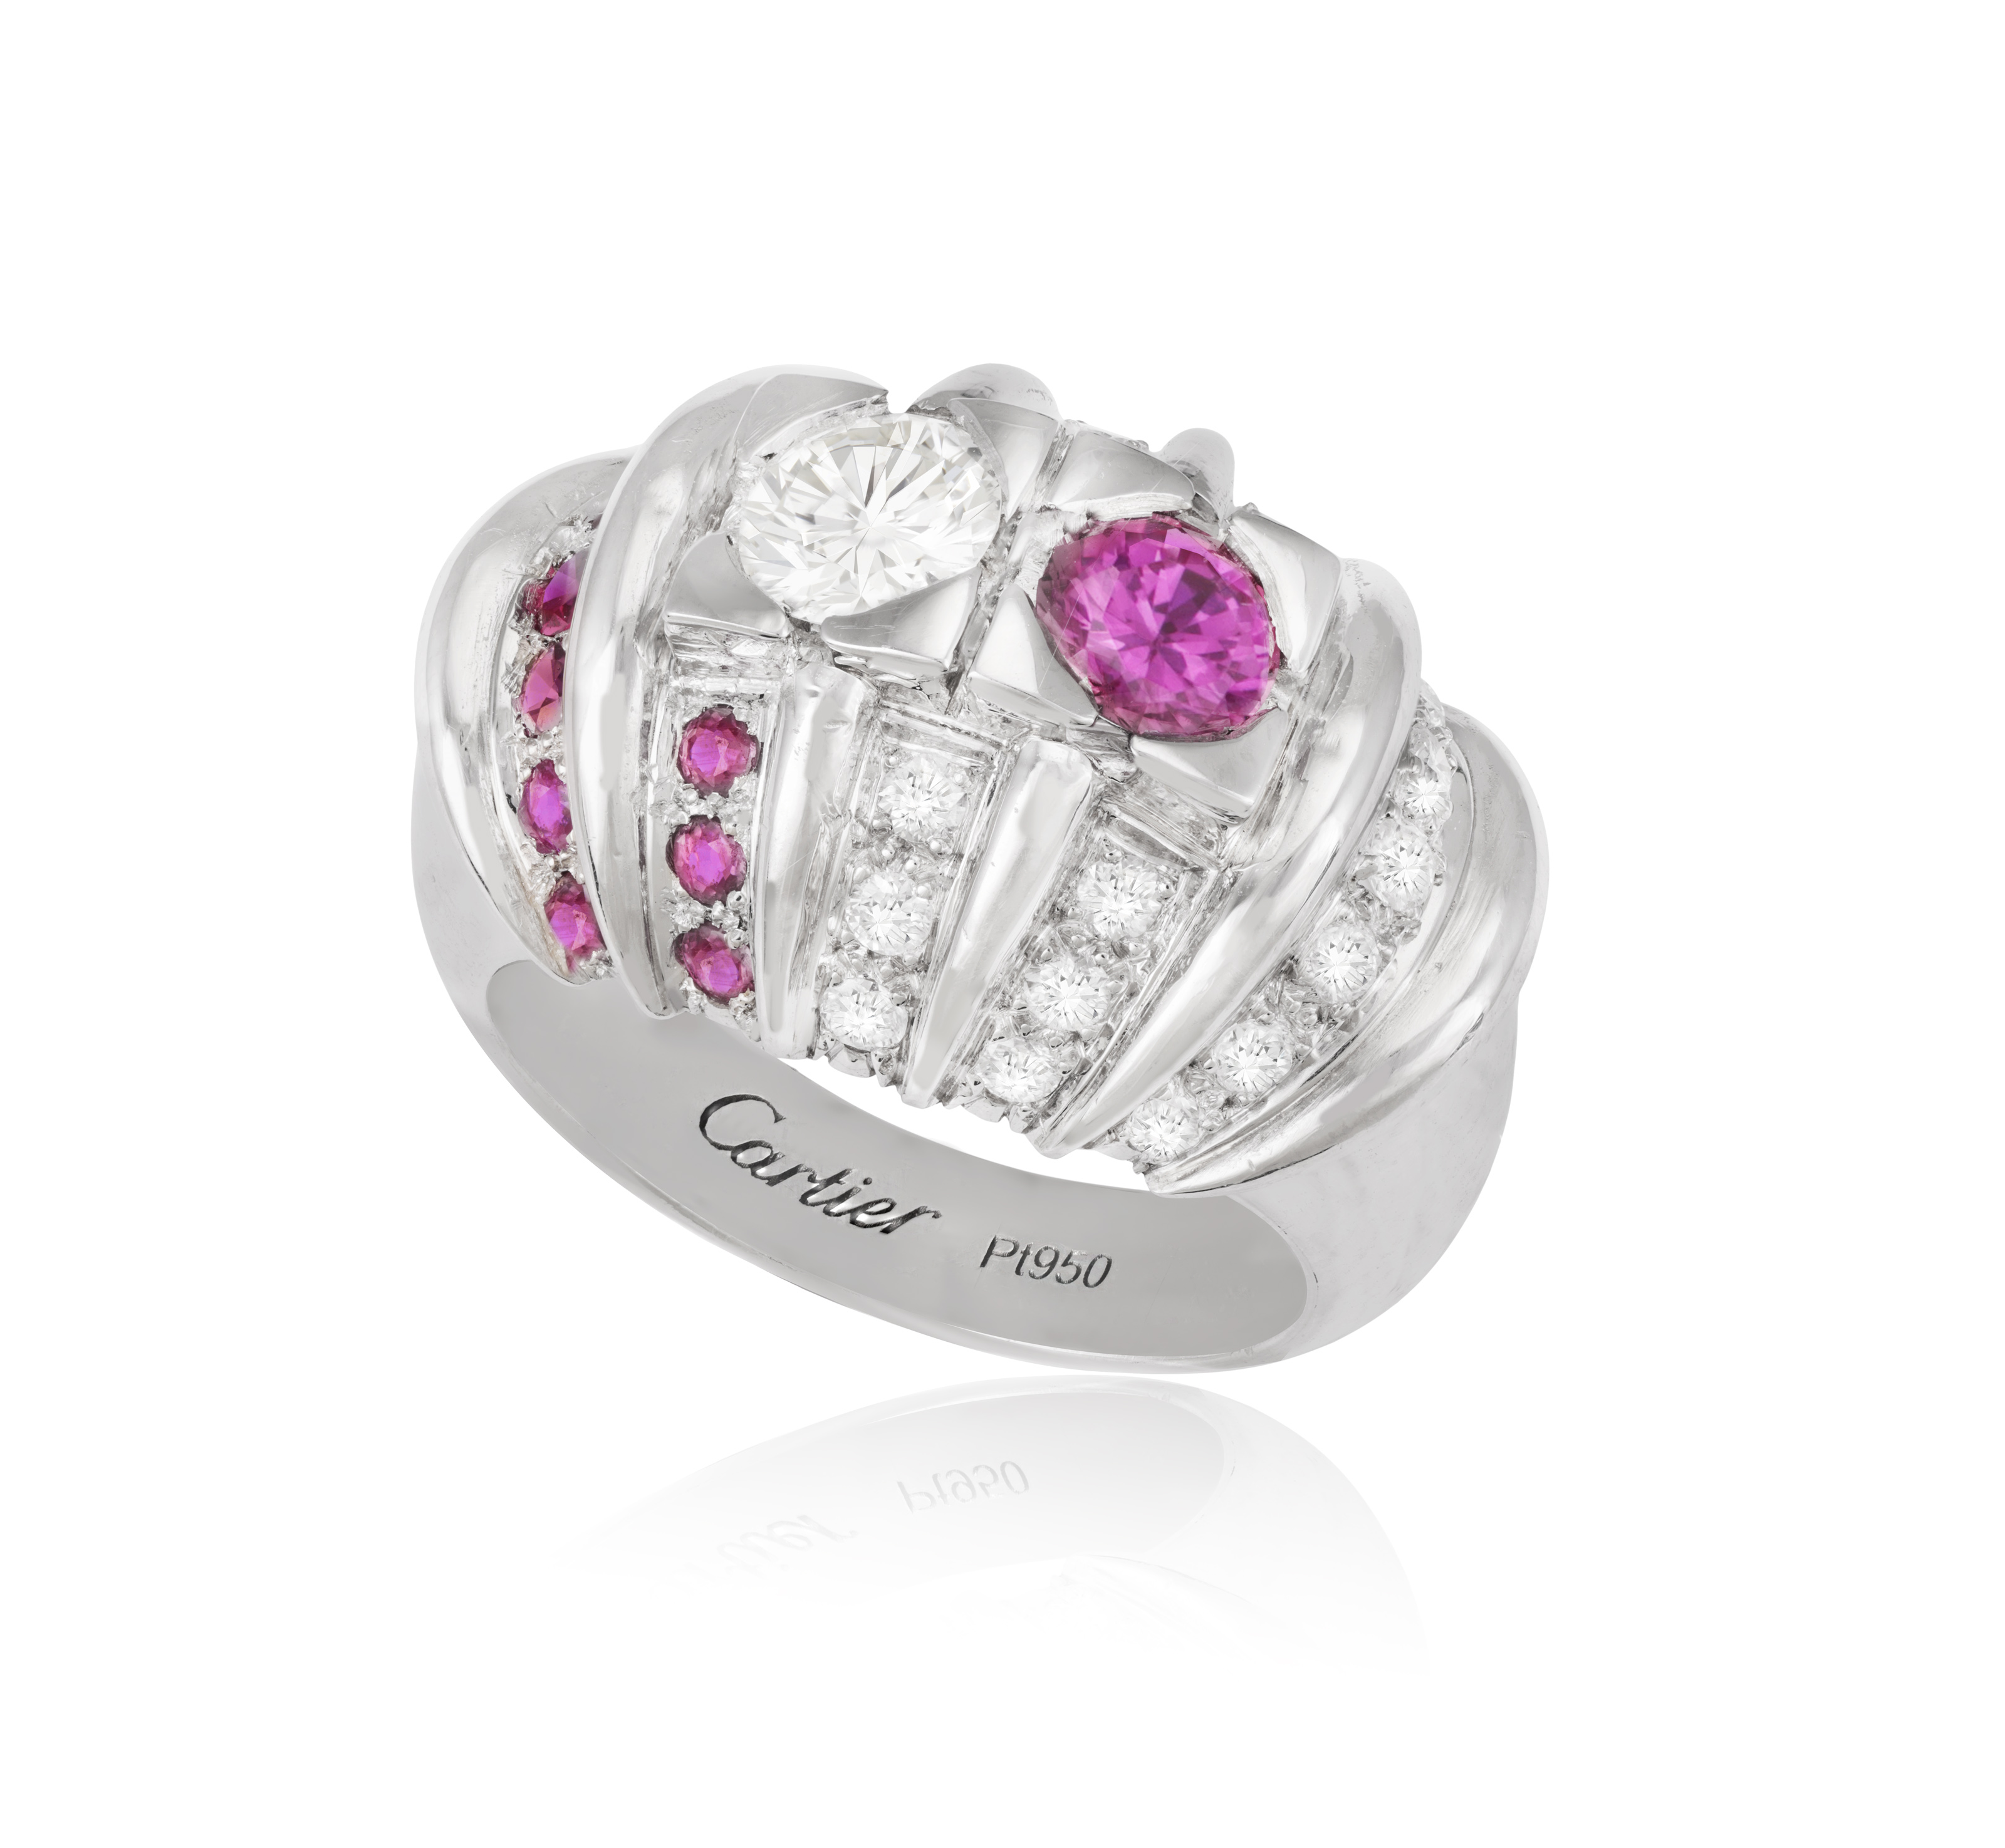 A RUBY AND DIAMOND DRESS RING, CARTIER Of domed fluted design, set with a brilliant-cut diamond